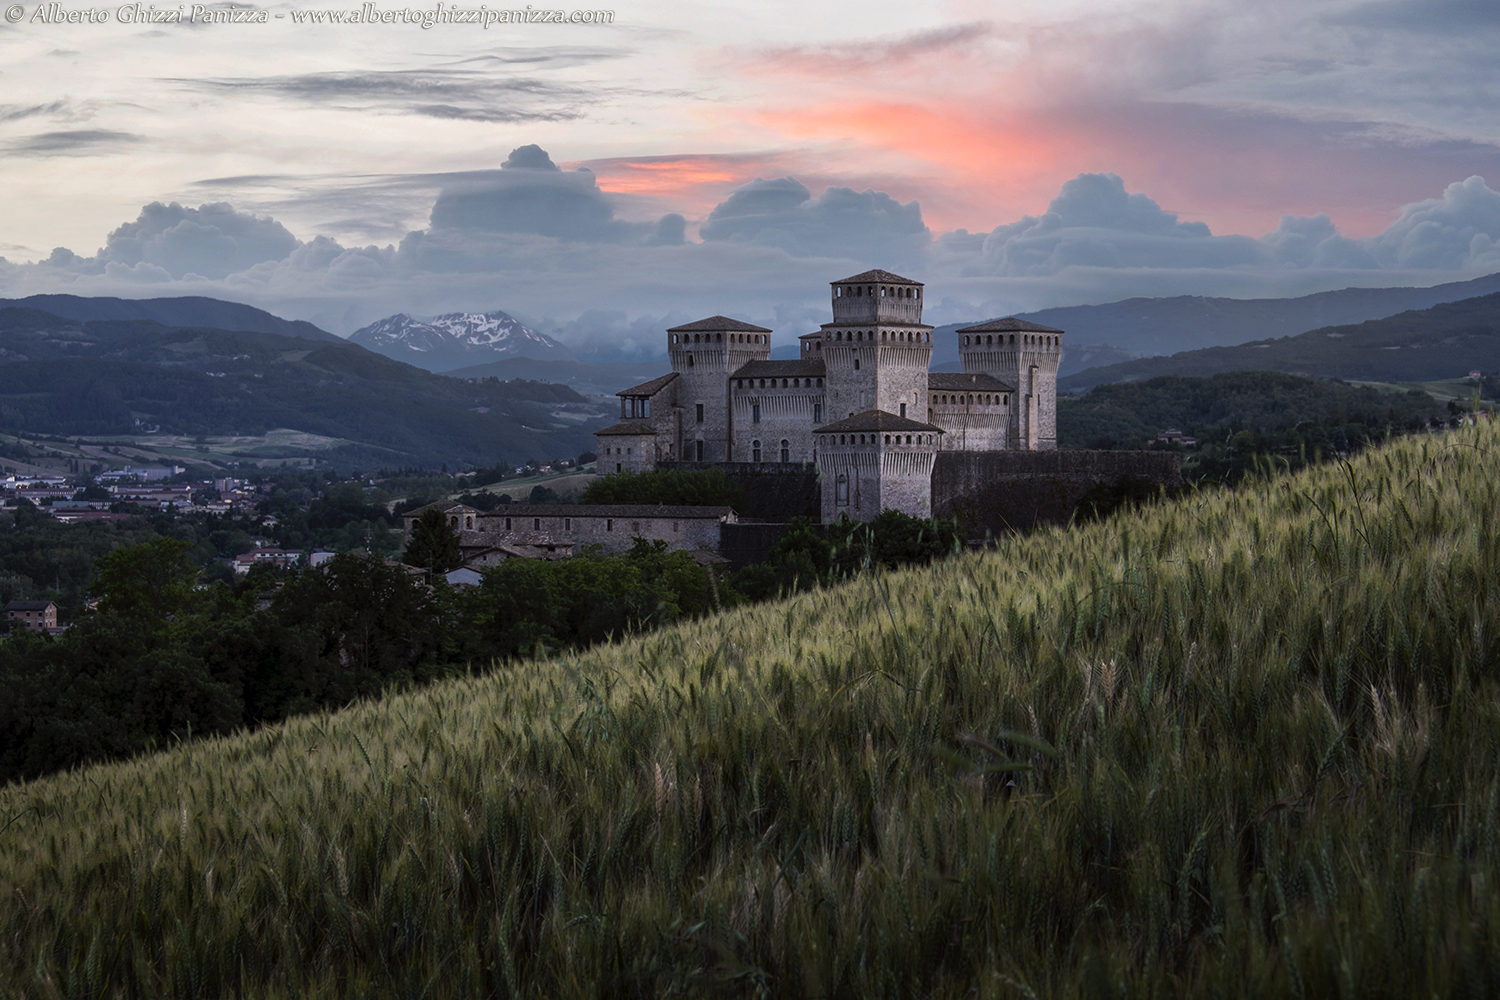 The wheat grows in the hills of Torrechiara...